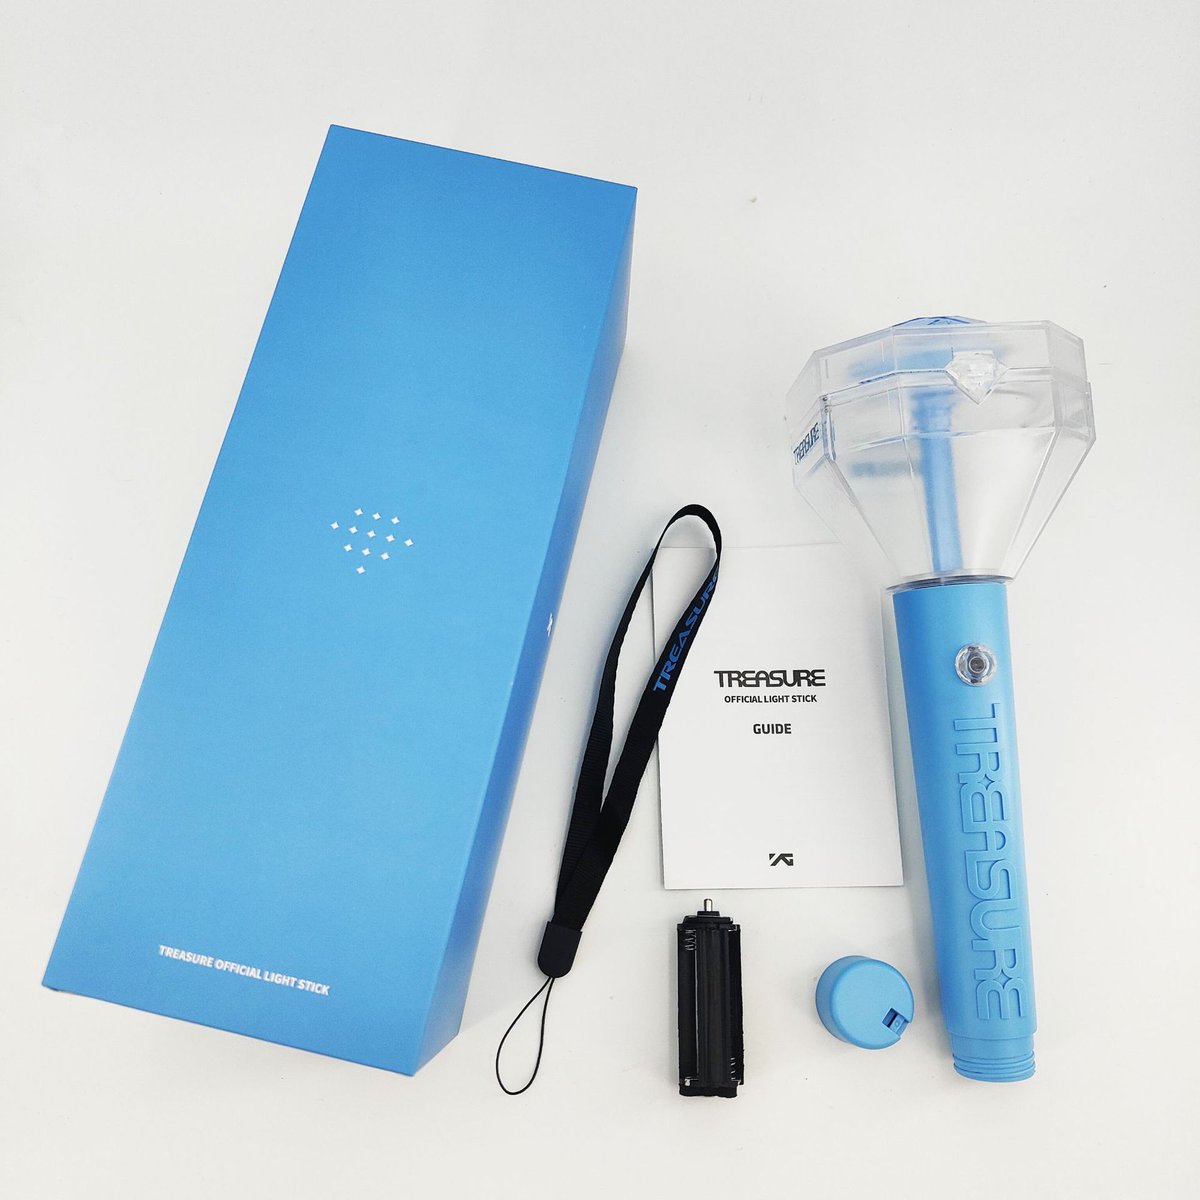 WTS TREASURE LIGHTSTICK READY STOCK

💸 PRICE RM 175 inc postage

- Full inclusions state in picture
- Freegift 3x battery & freebies
- Never used for concert
- Not include YG POB
- Condition 9.8/10

📌 Can request pic & video proof
📌 Fast payment only 
📌 Bank transfer only